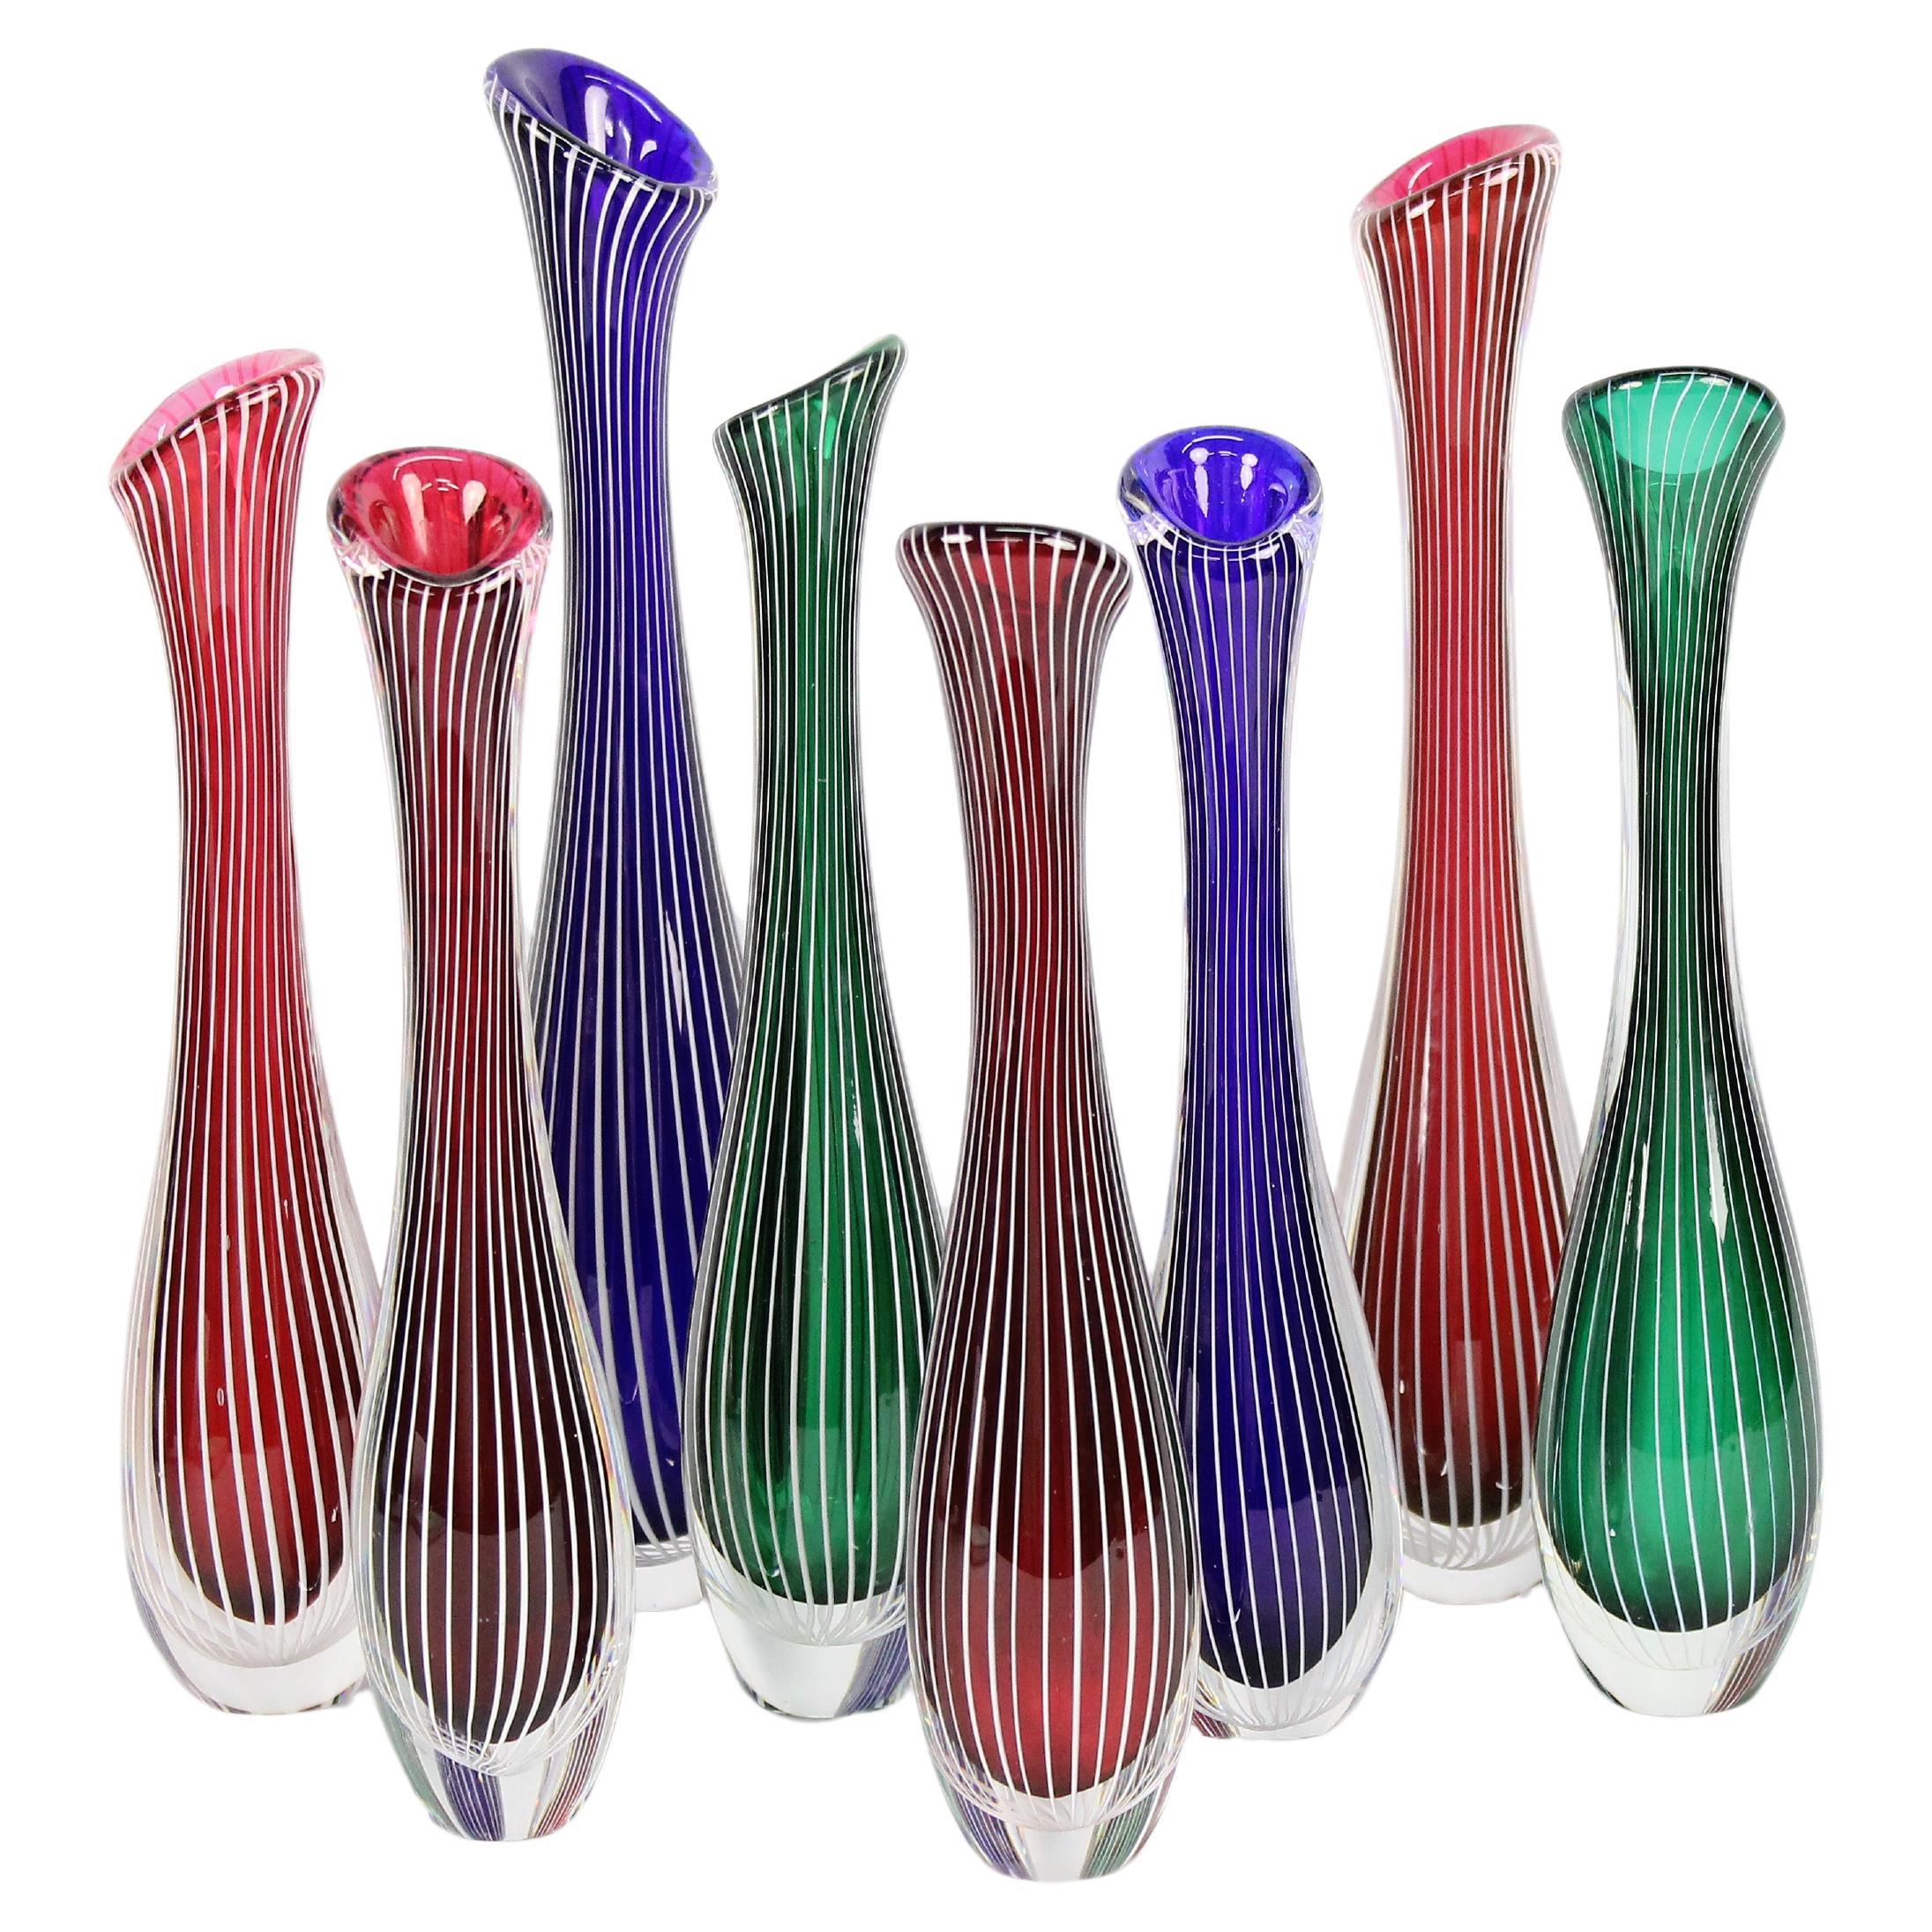 An Amazing Set of Eight 1950s Stripe Vases by Vicke Lindstrand for Kosta Sweden.